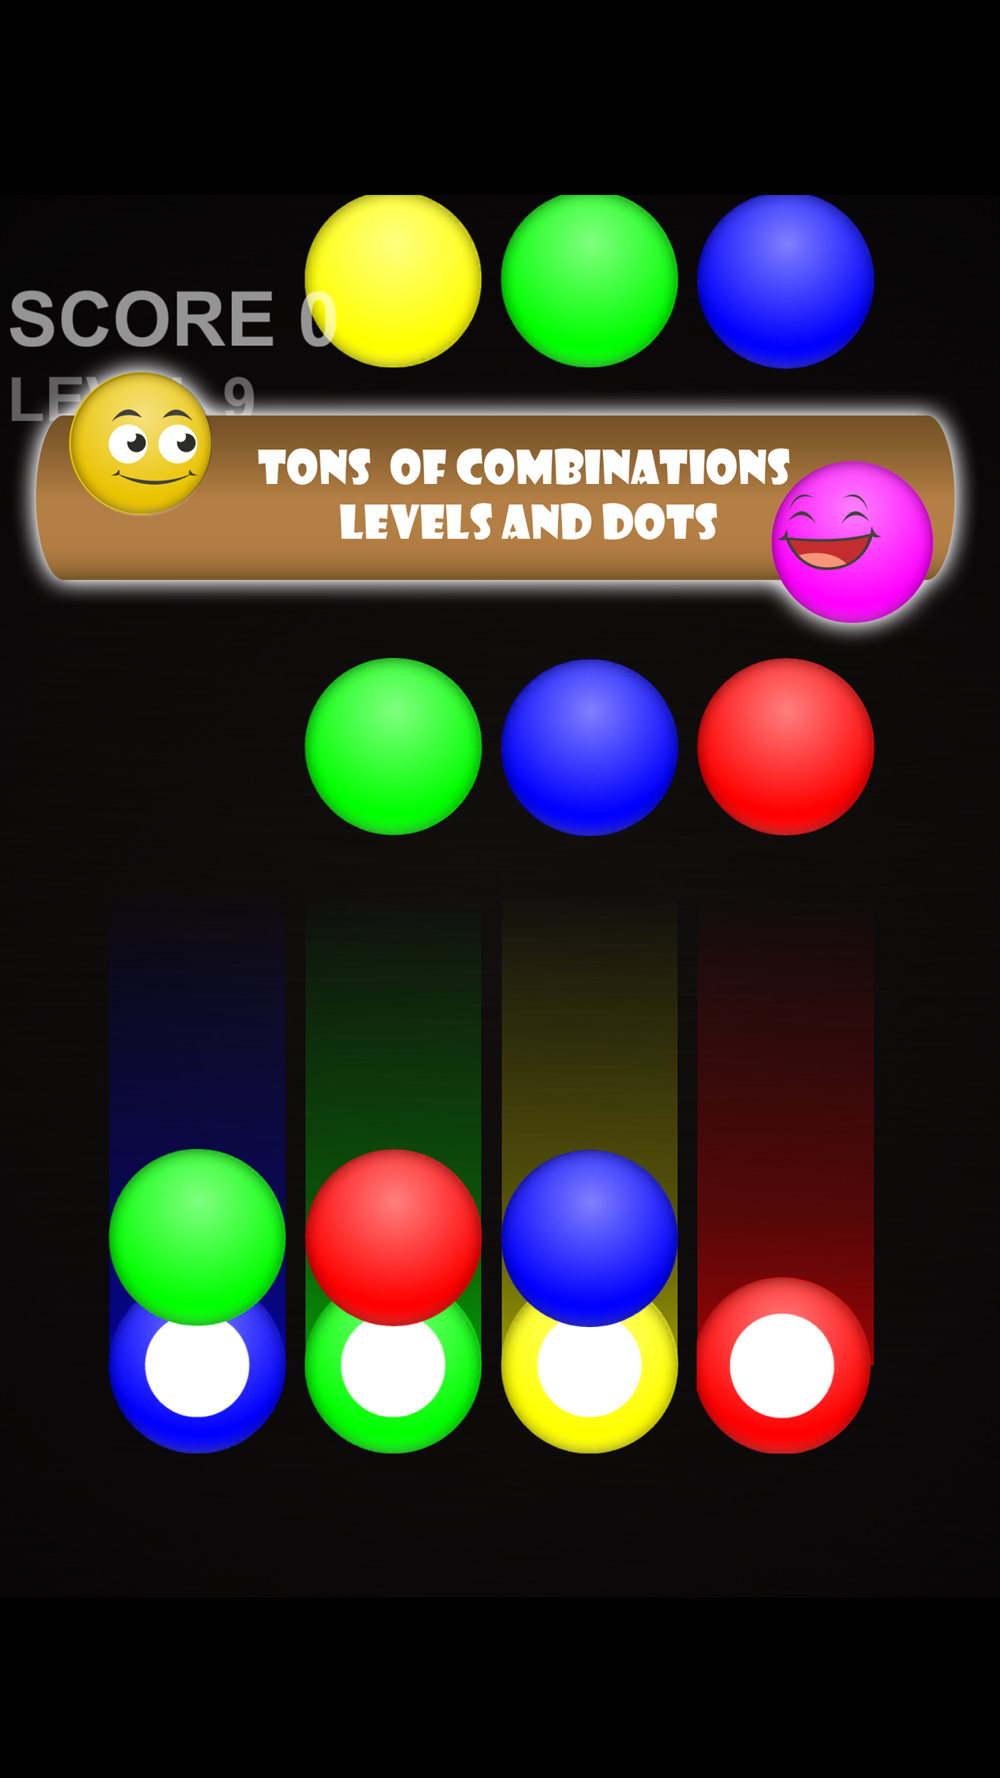 Color Swipe Dots Switch The Circle Color To Match The Dot Colors Addictive Free Puzzle Game With Tons Of Levels And Styles For Iphone Free Download Color Swipe Dots